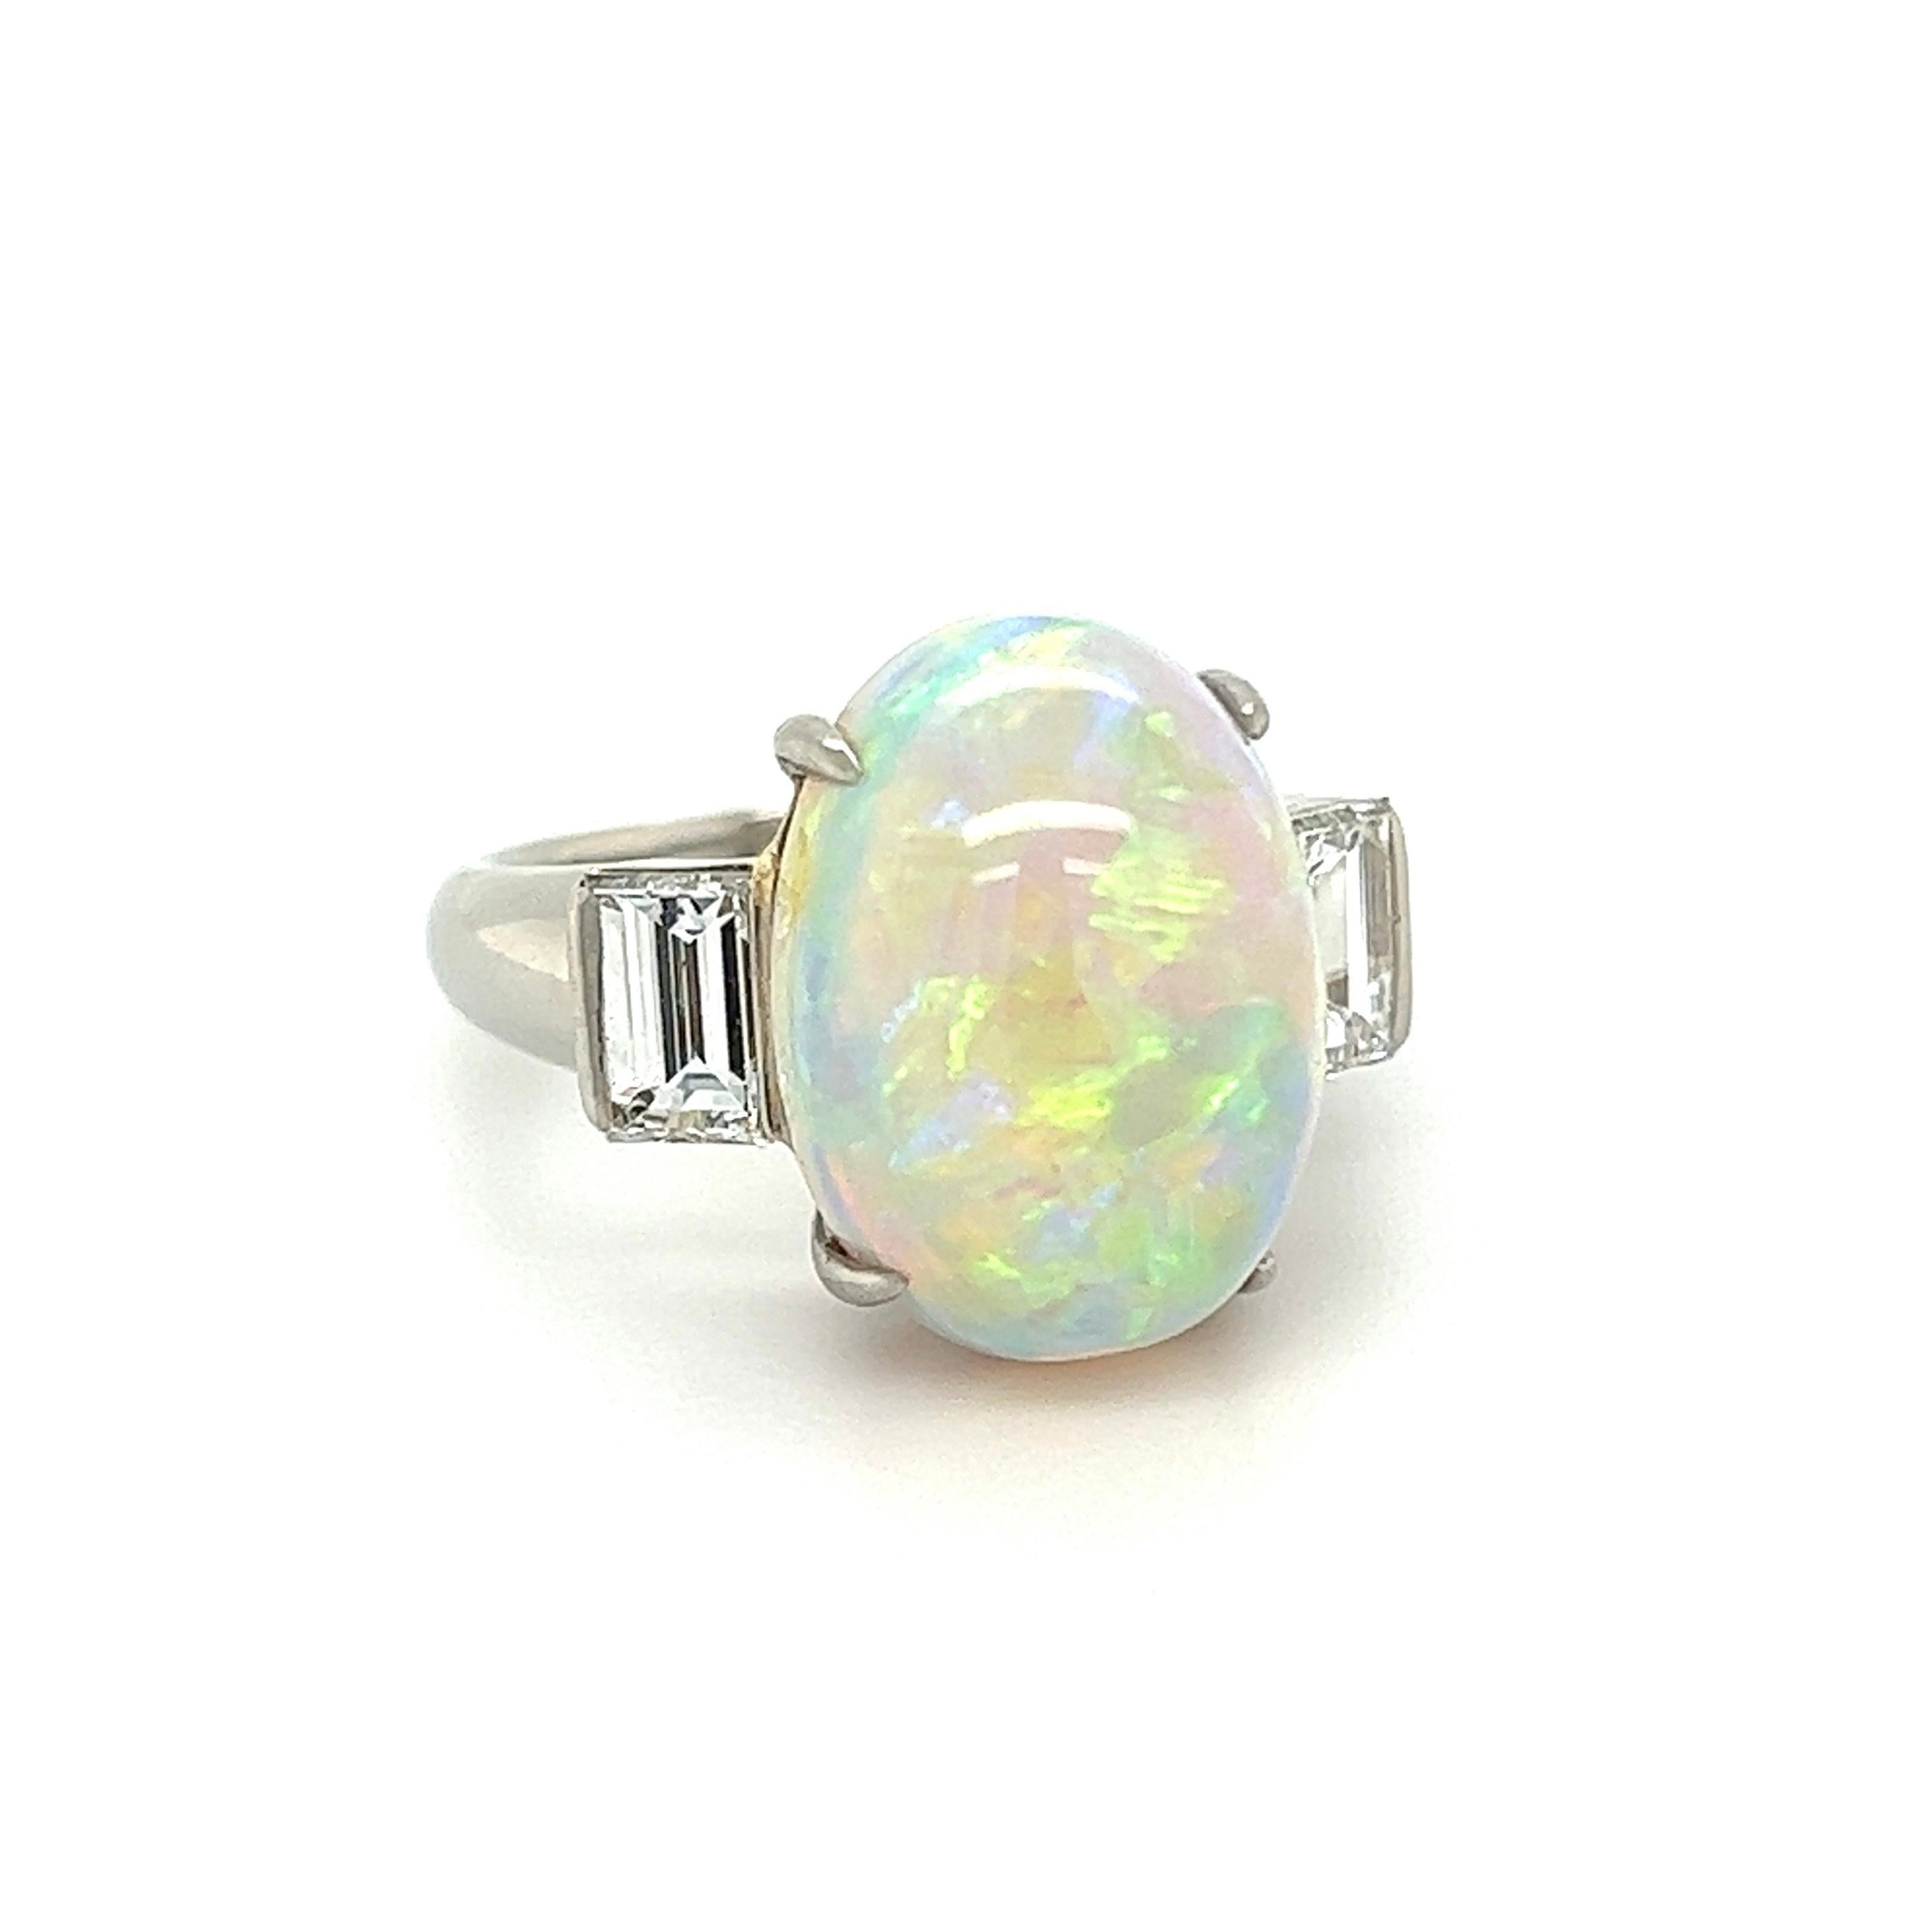 Simply Beautiful and finely detailed Andamooka Opal and Diamond Platinum Cocktail Ring. Centering a securely nestled Hand set Australian Andamooka White Opal, weighing 7.39 Carats, either side set with Diamonds, approx. 1.13 total carat weight. Hand